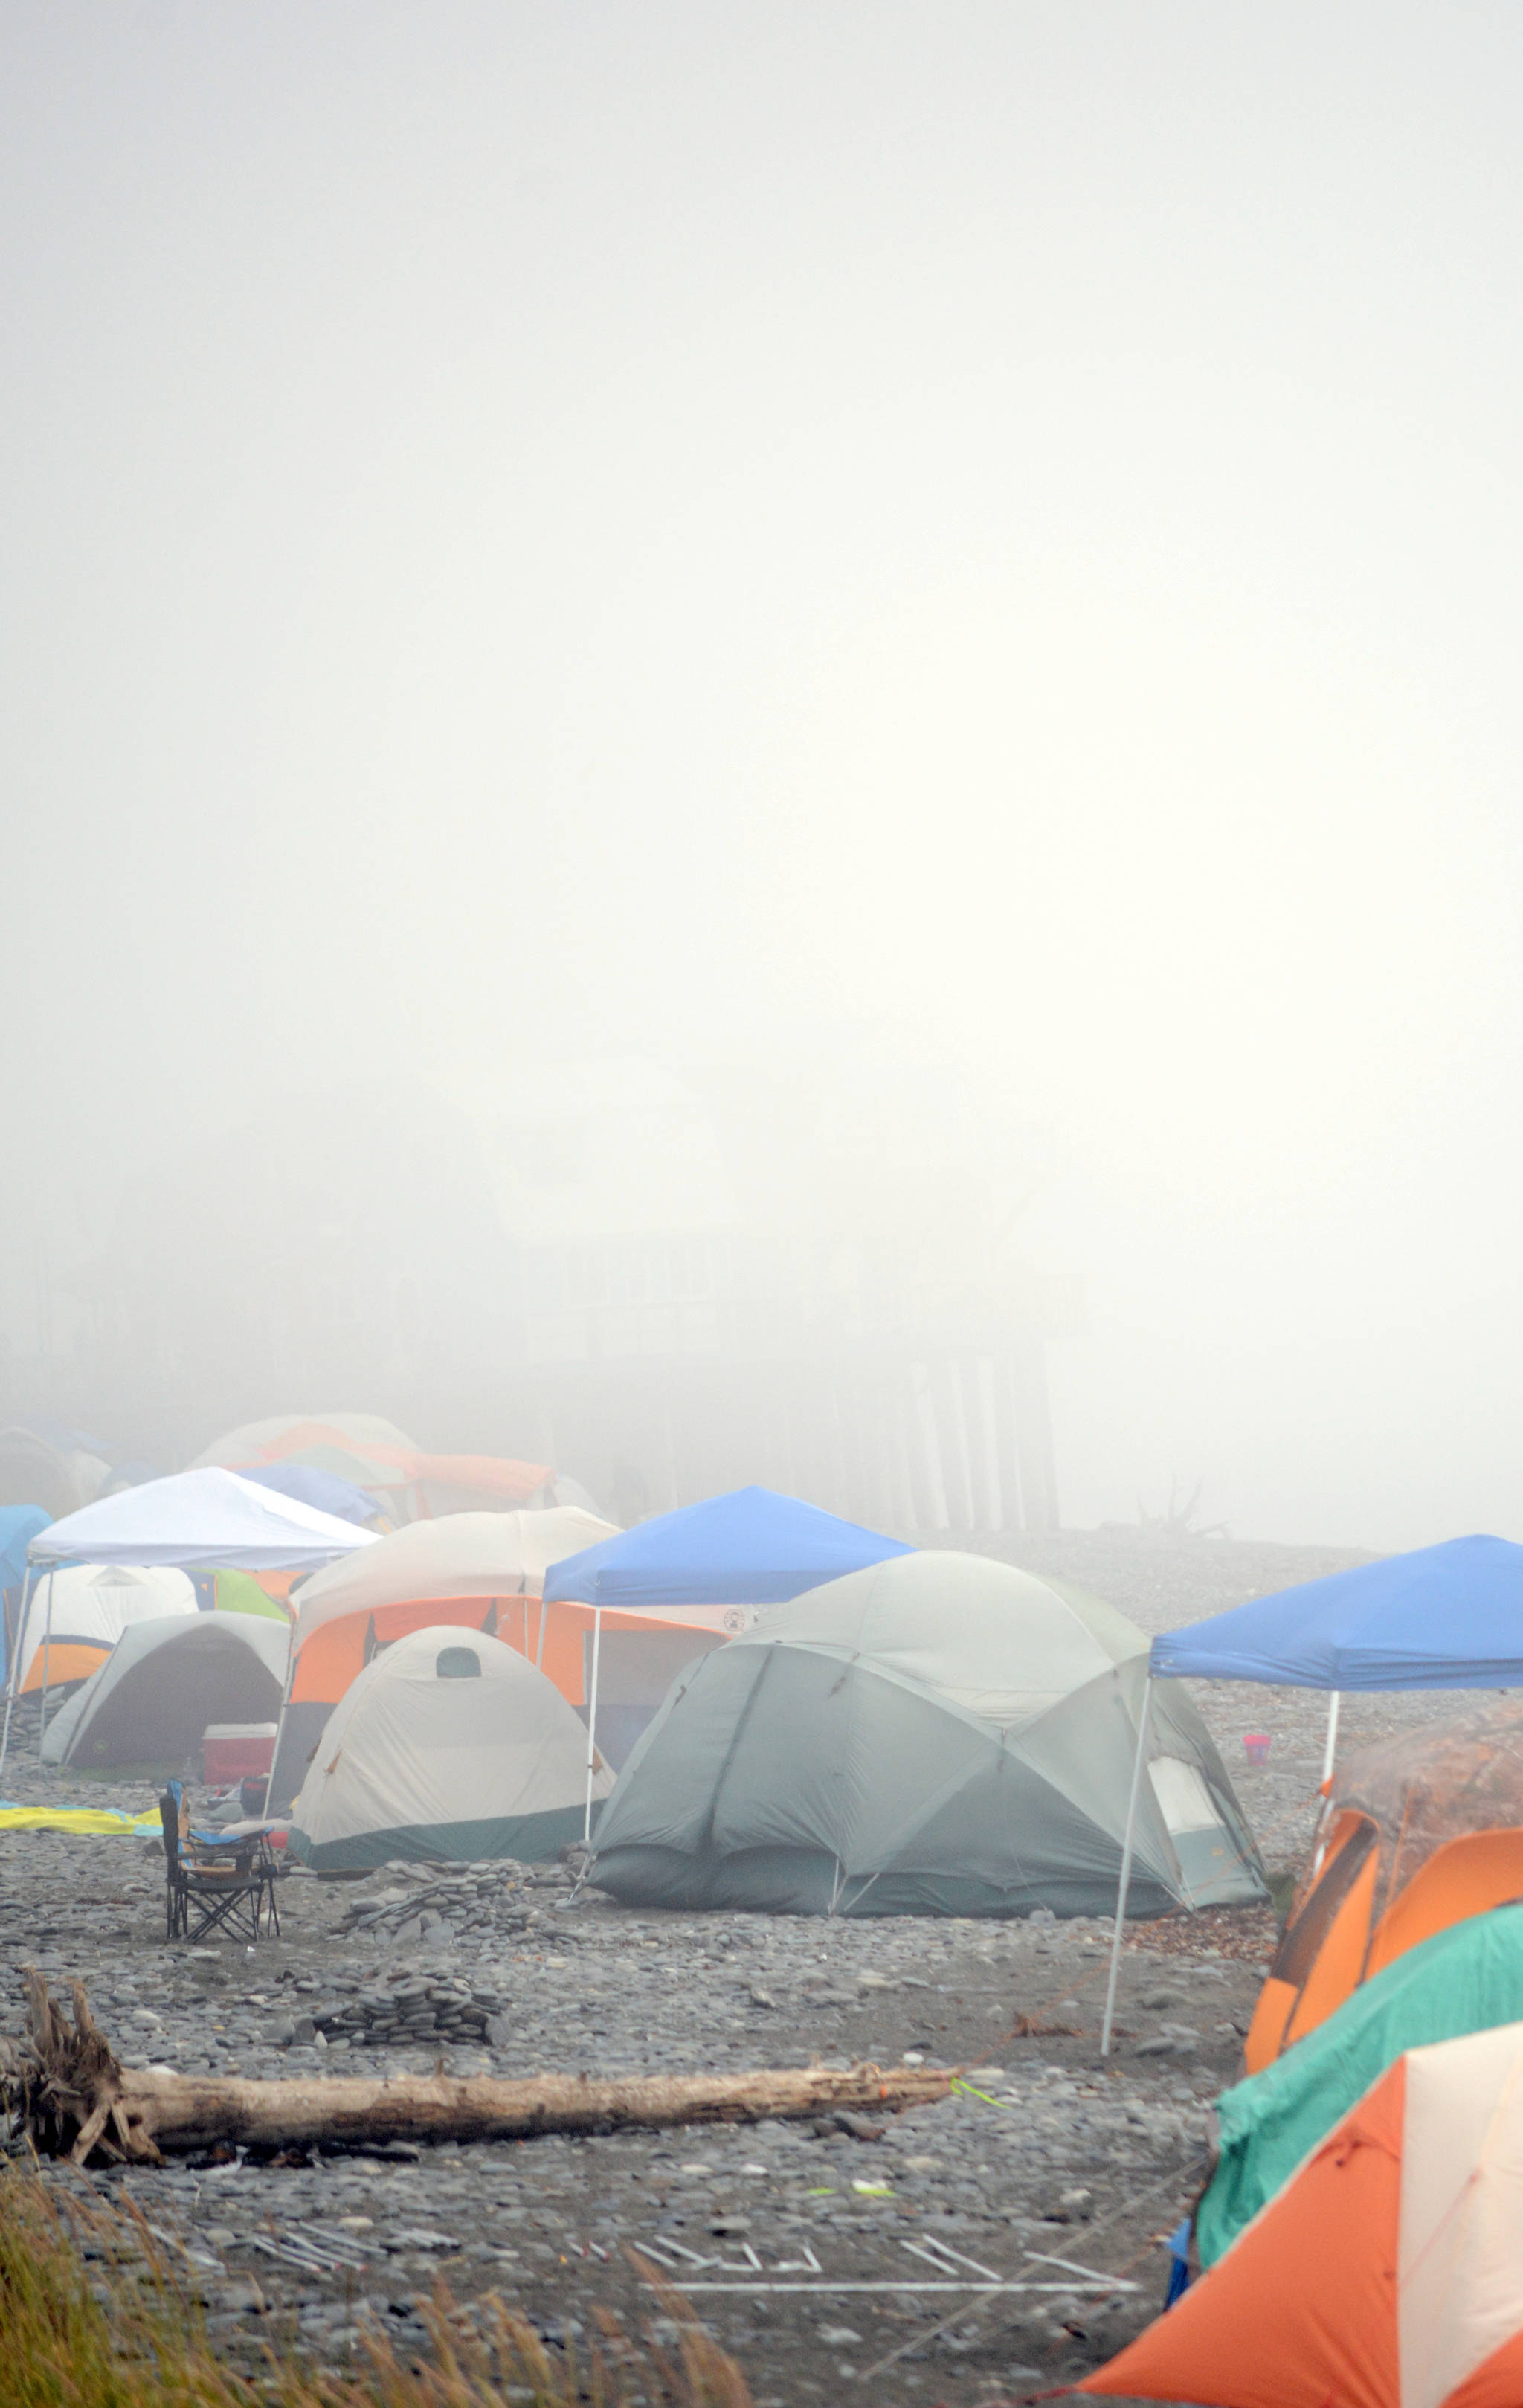 Lost in the mist: Fog shrouds a campground on the Homer Spit beach last Saturday. Tents and motorhomes crowded the beaches and Spit.